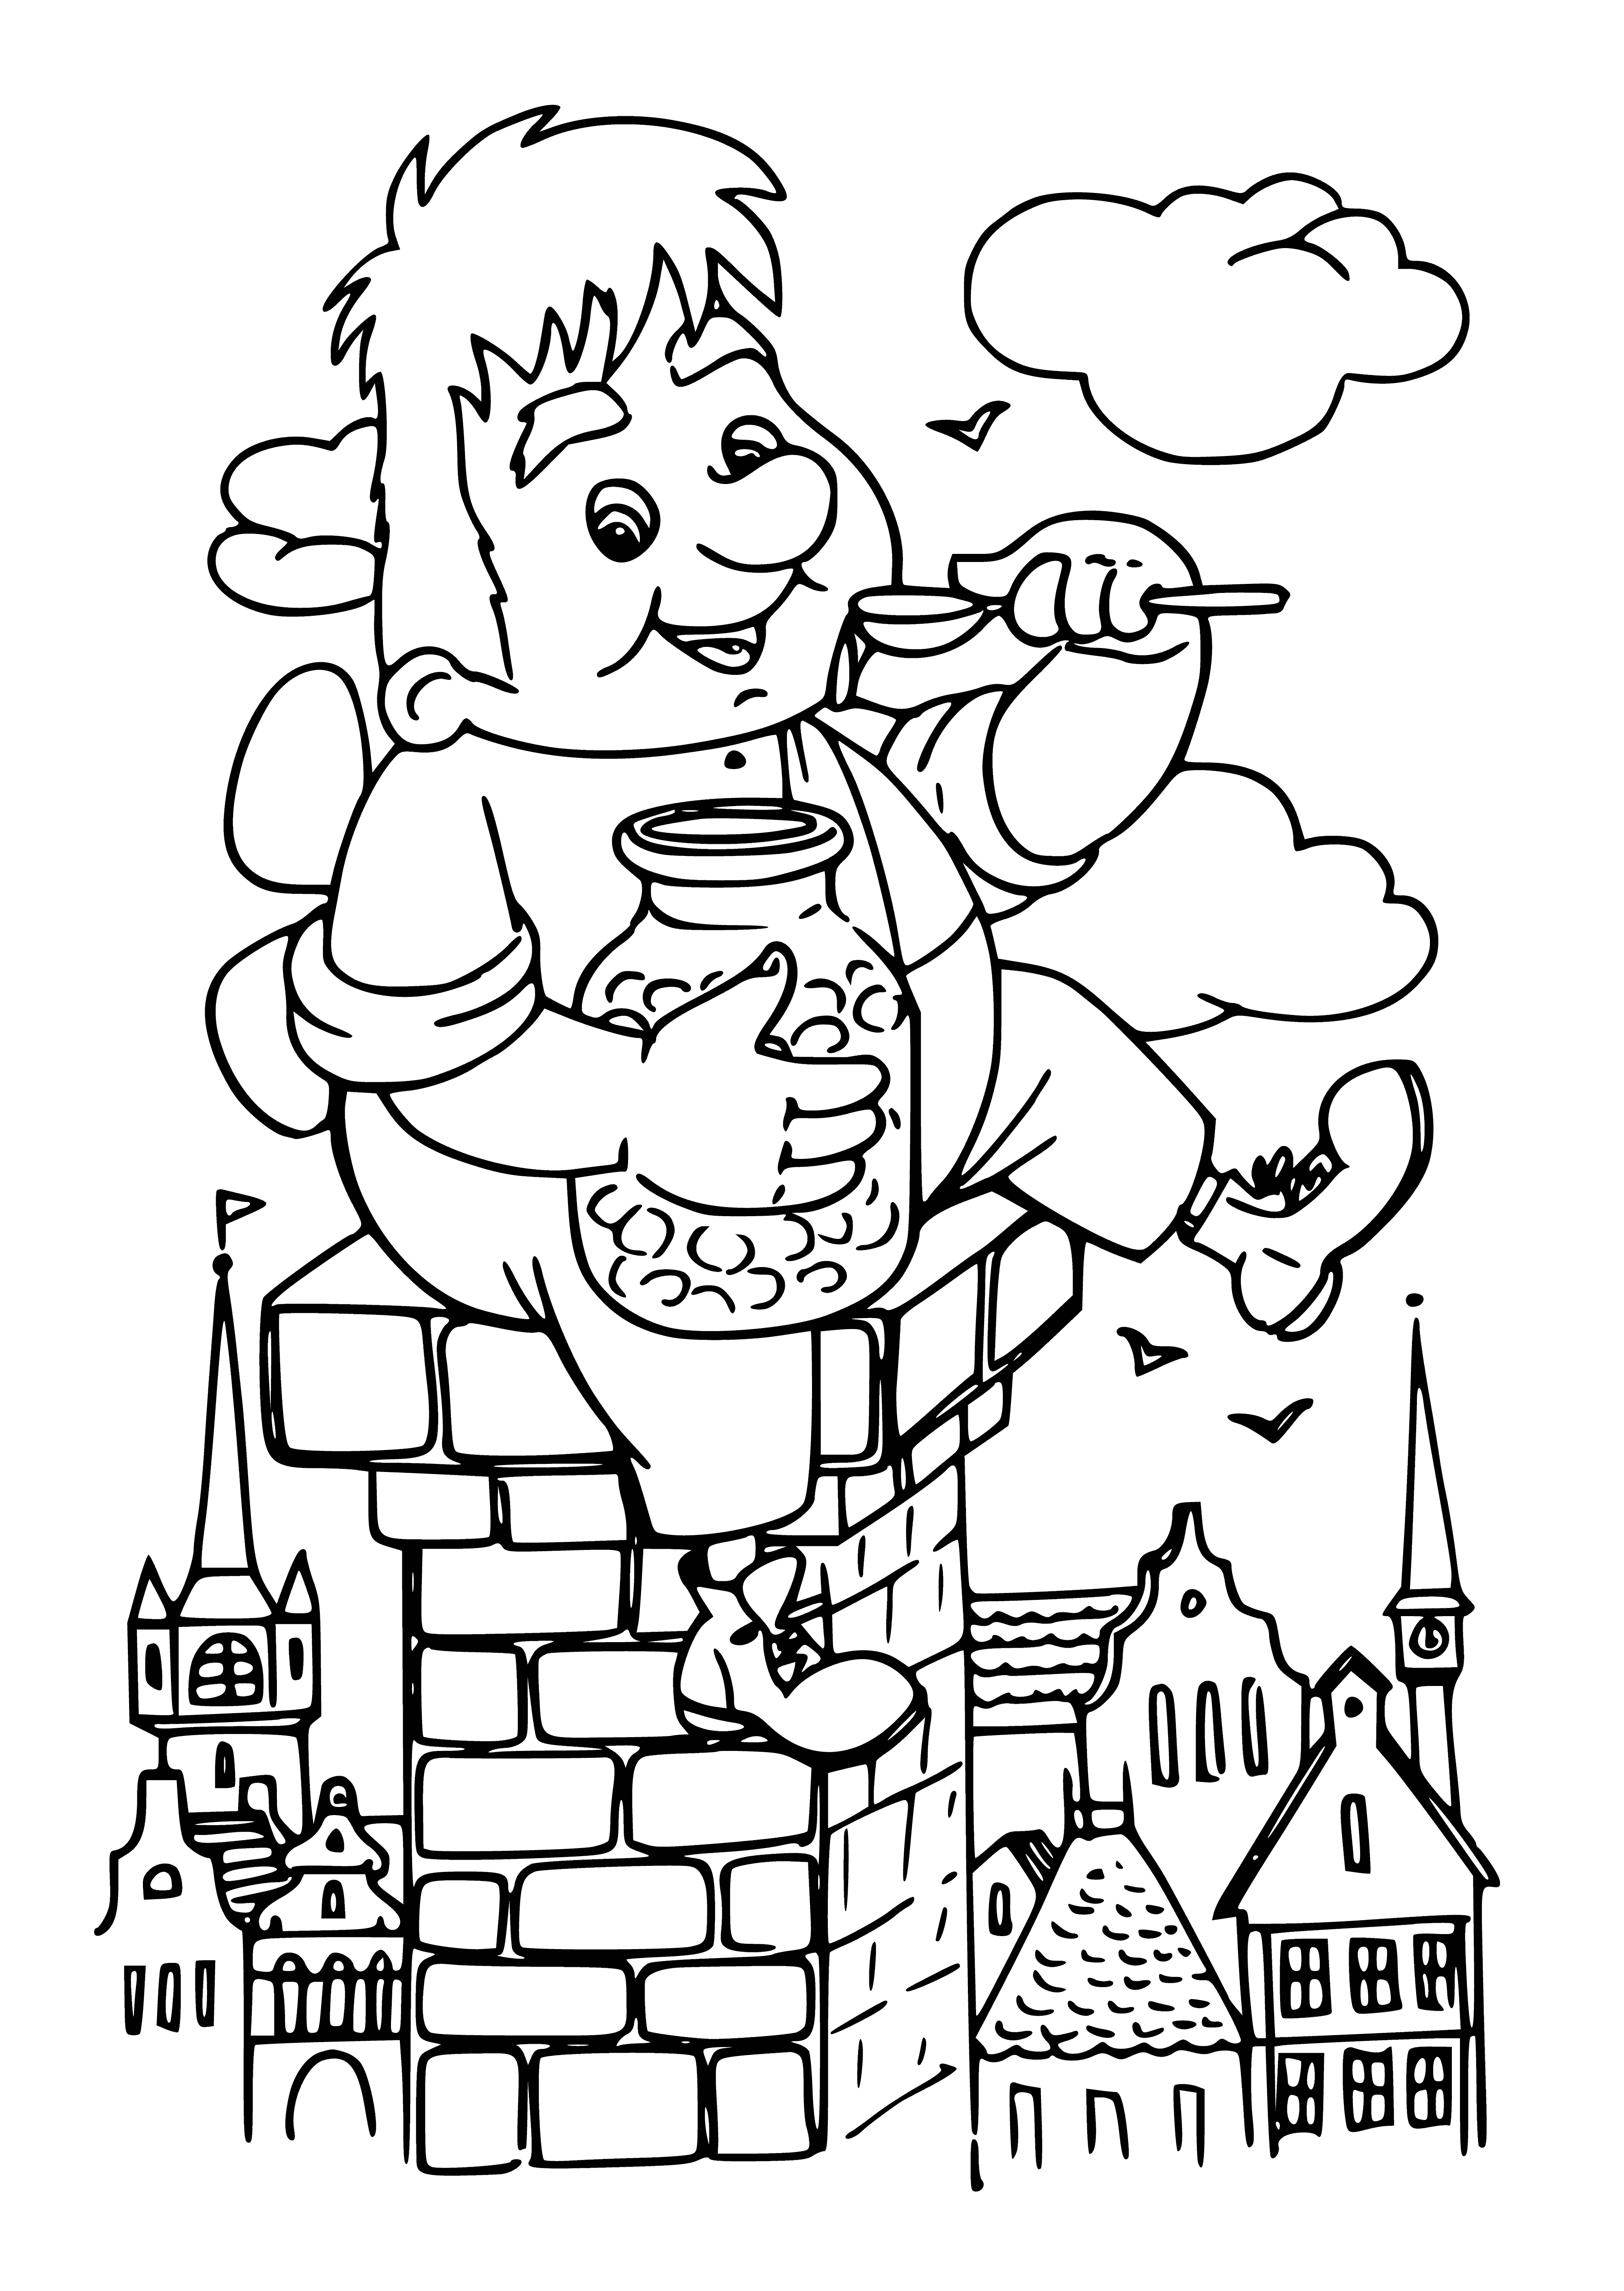 coloring page: Two people on a roof-top; adult looking down at a child who looks up. #ColoringPage